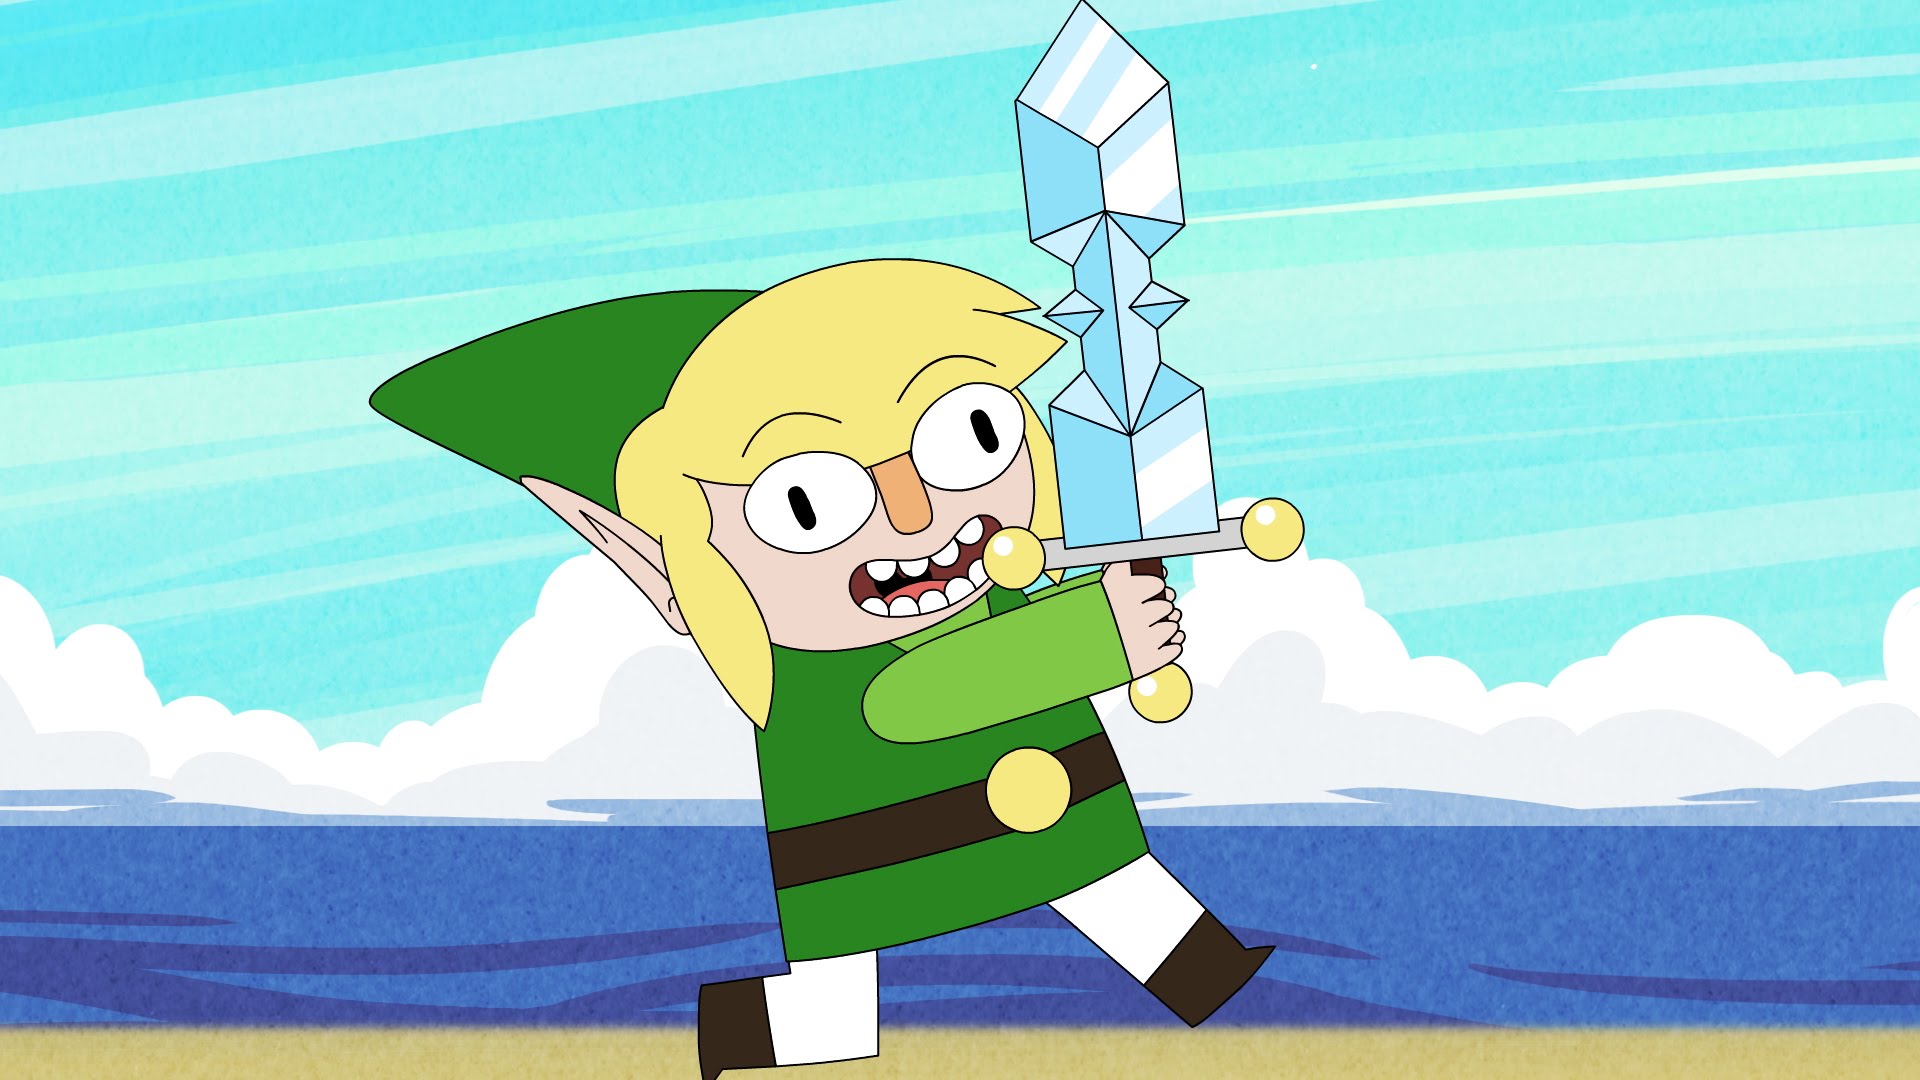 ADHD Adds Amusing Lyrics to 'The Legend of Zelda' Video Game Theme Song in  a New Animated Music Video